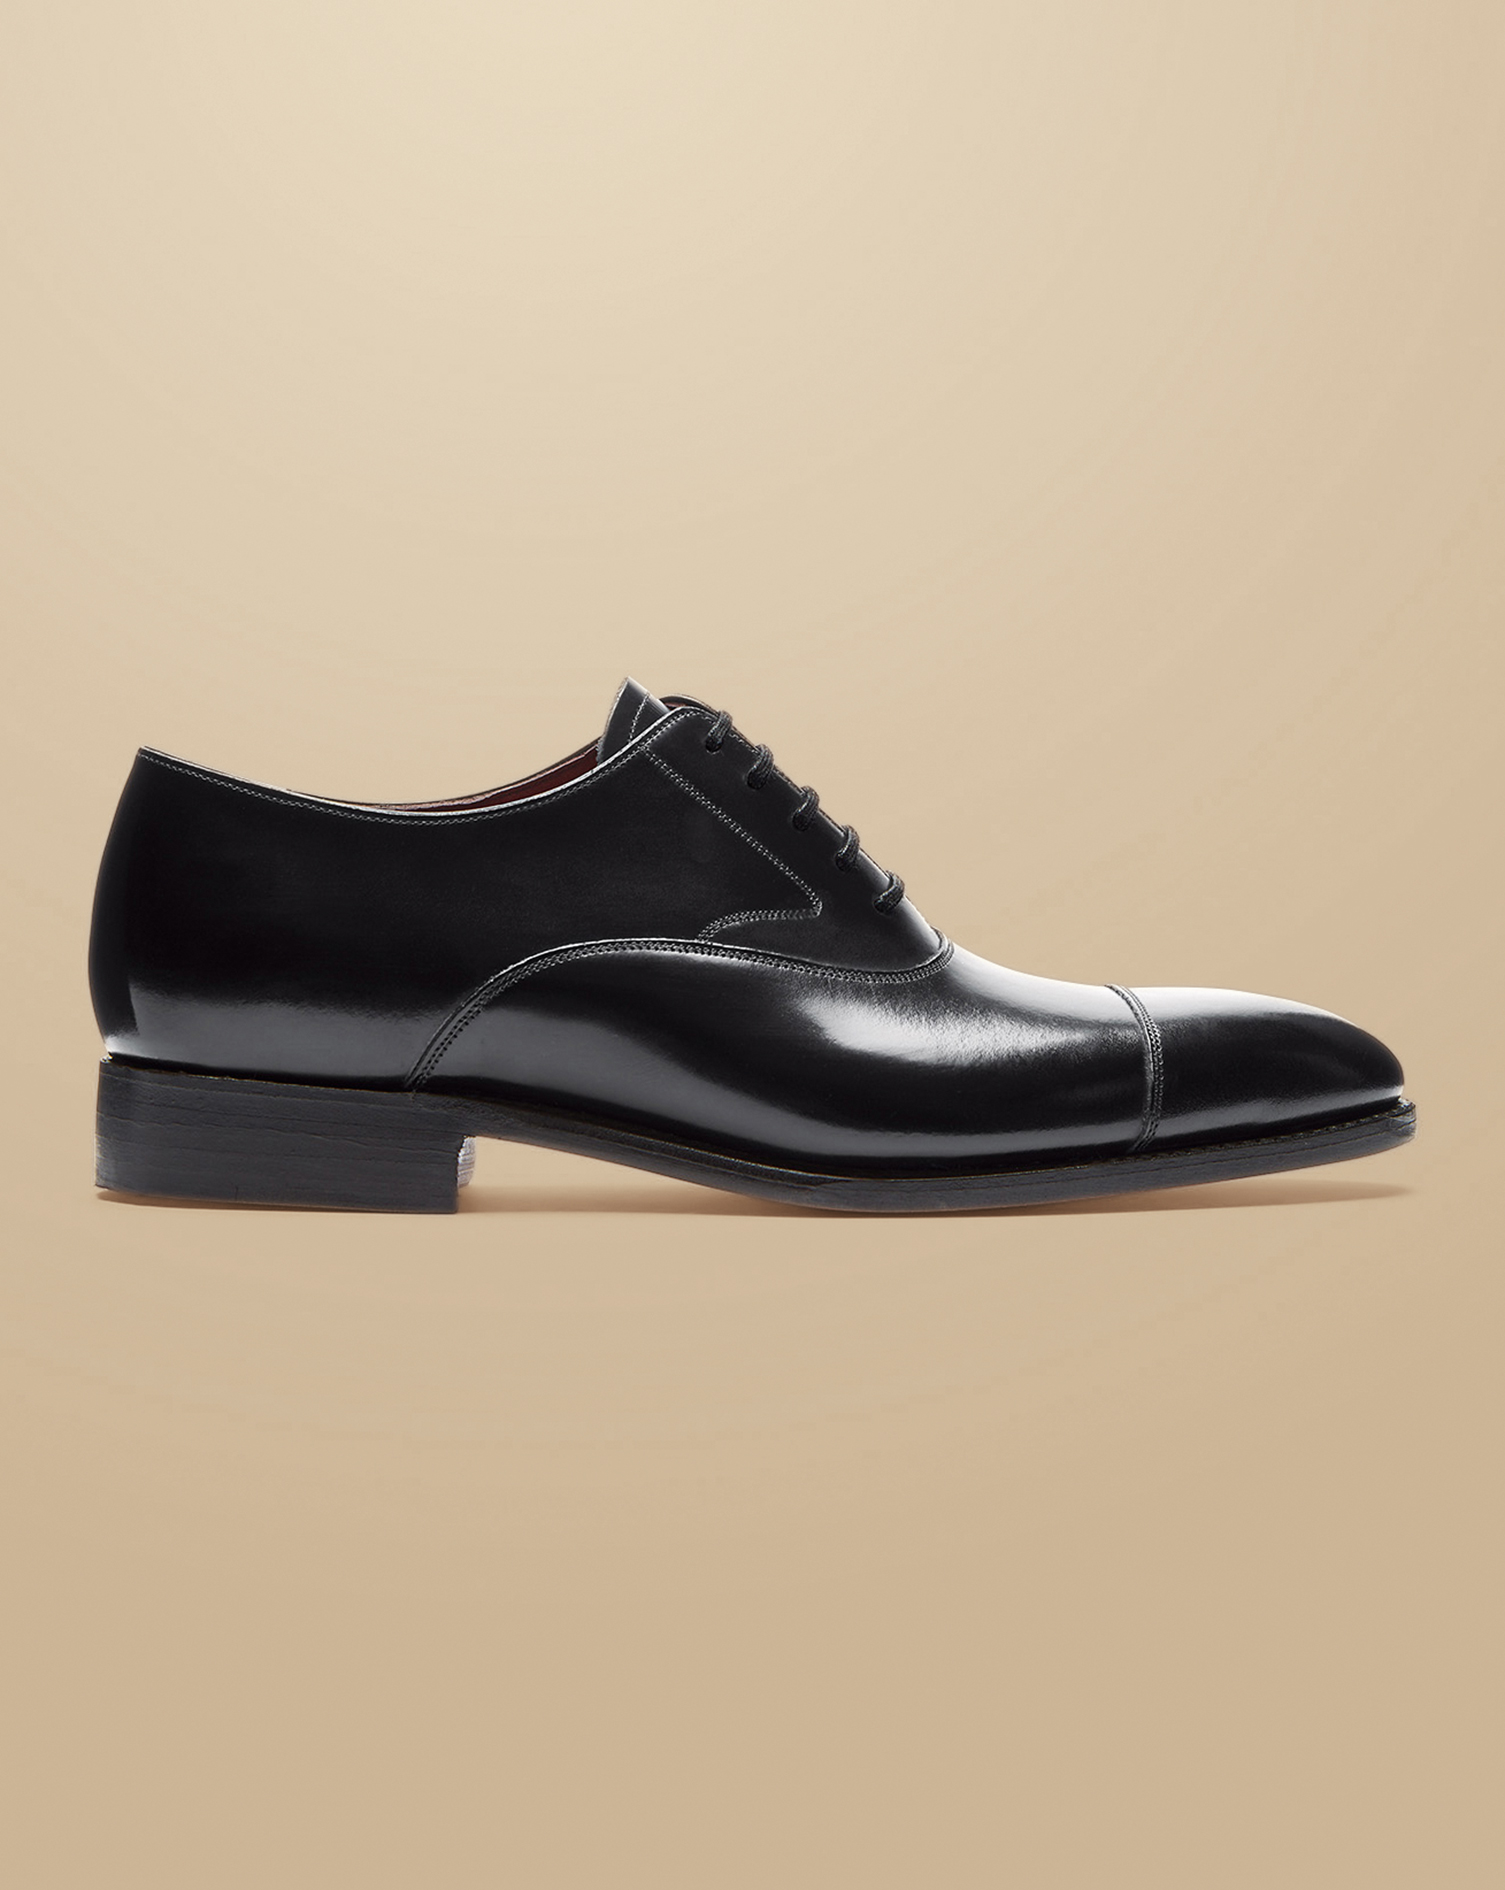 Men's Charles Tyrwhitt Made In England High-Shine Oxford Shoes - Black Size 10 Leather
